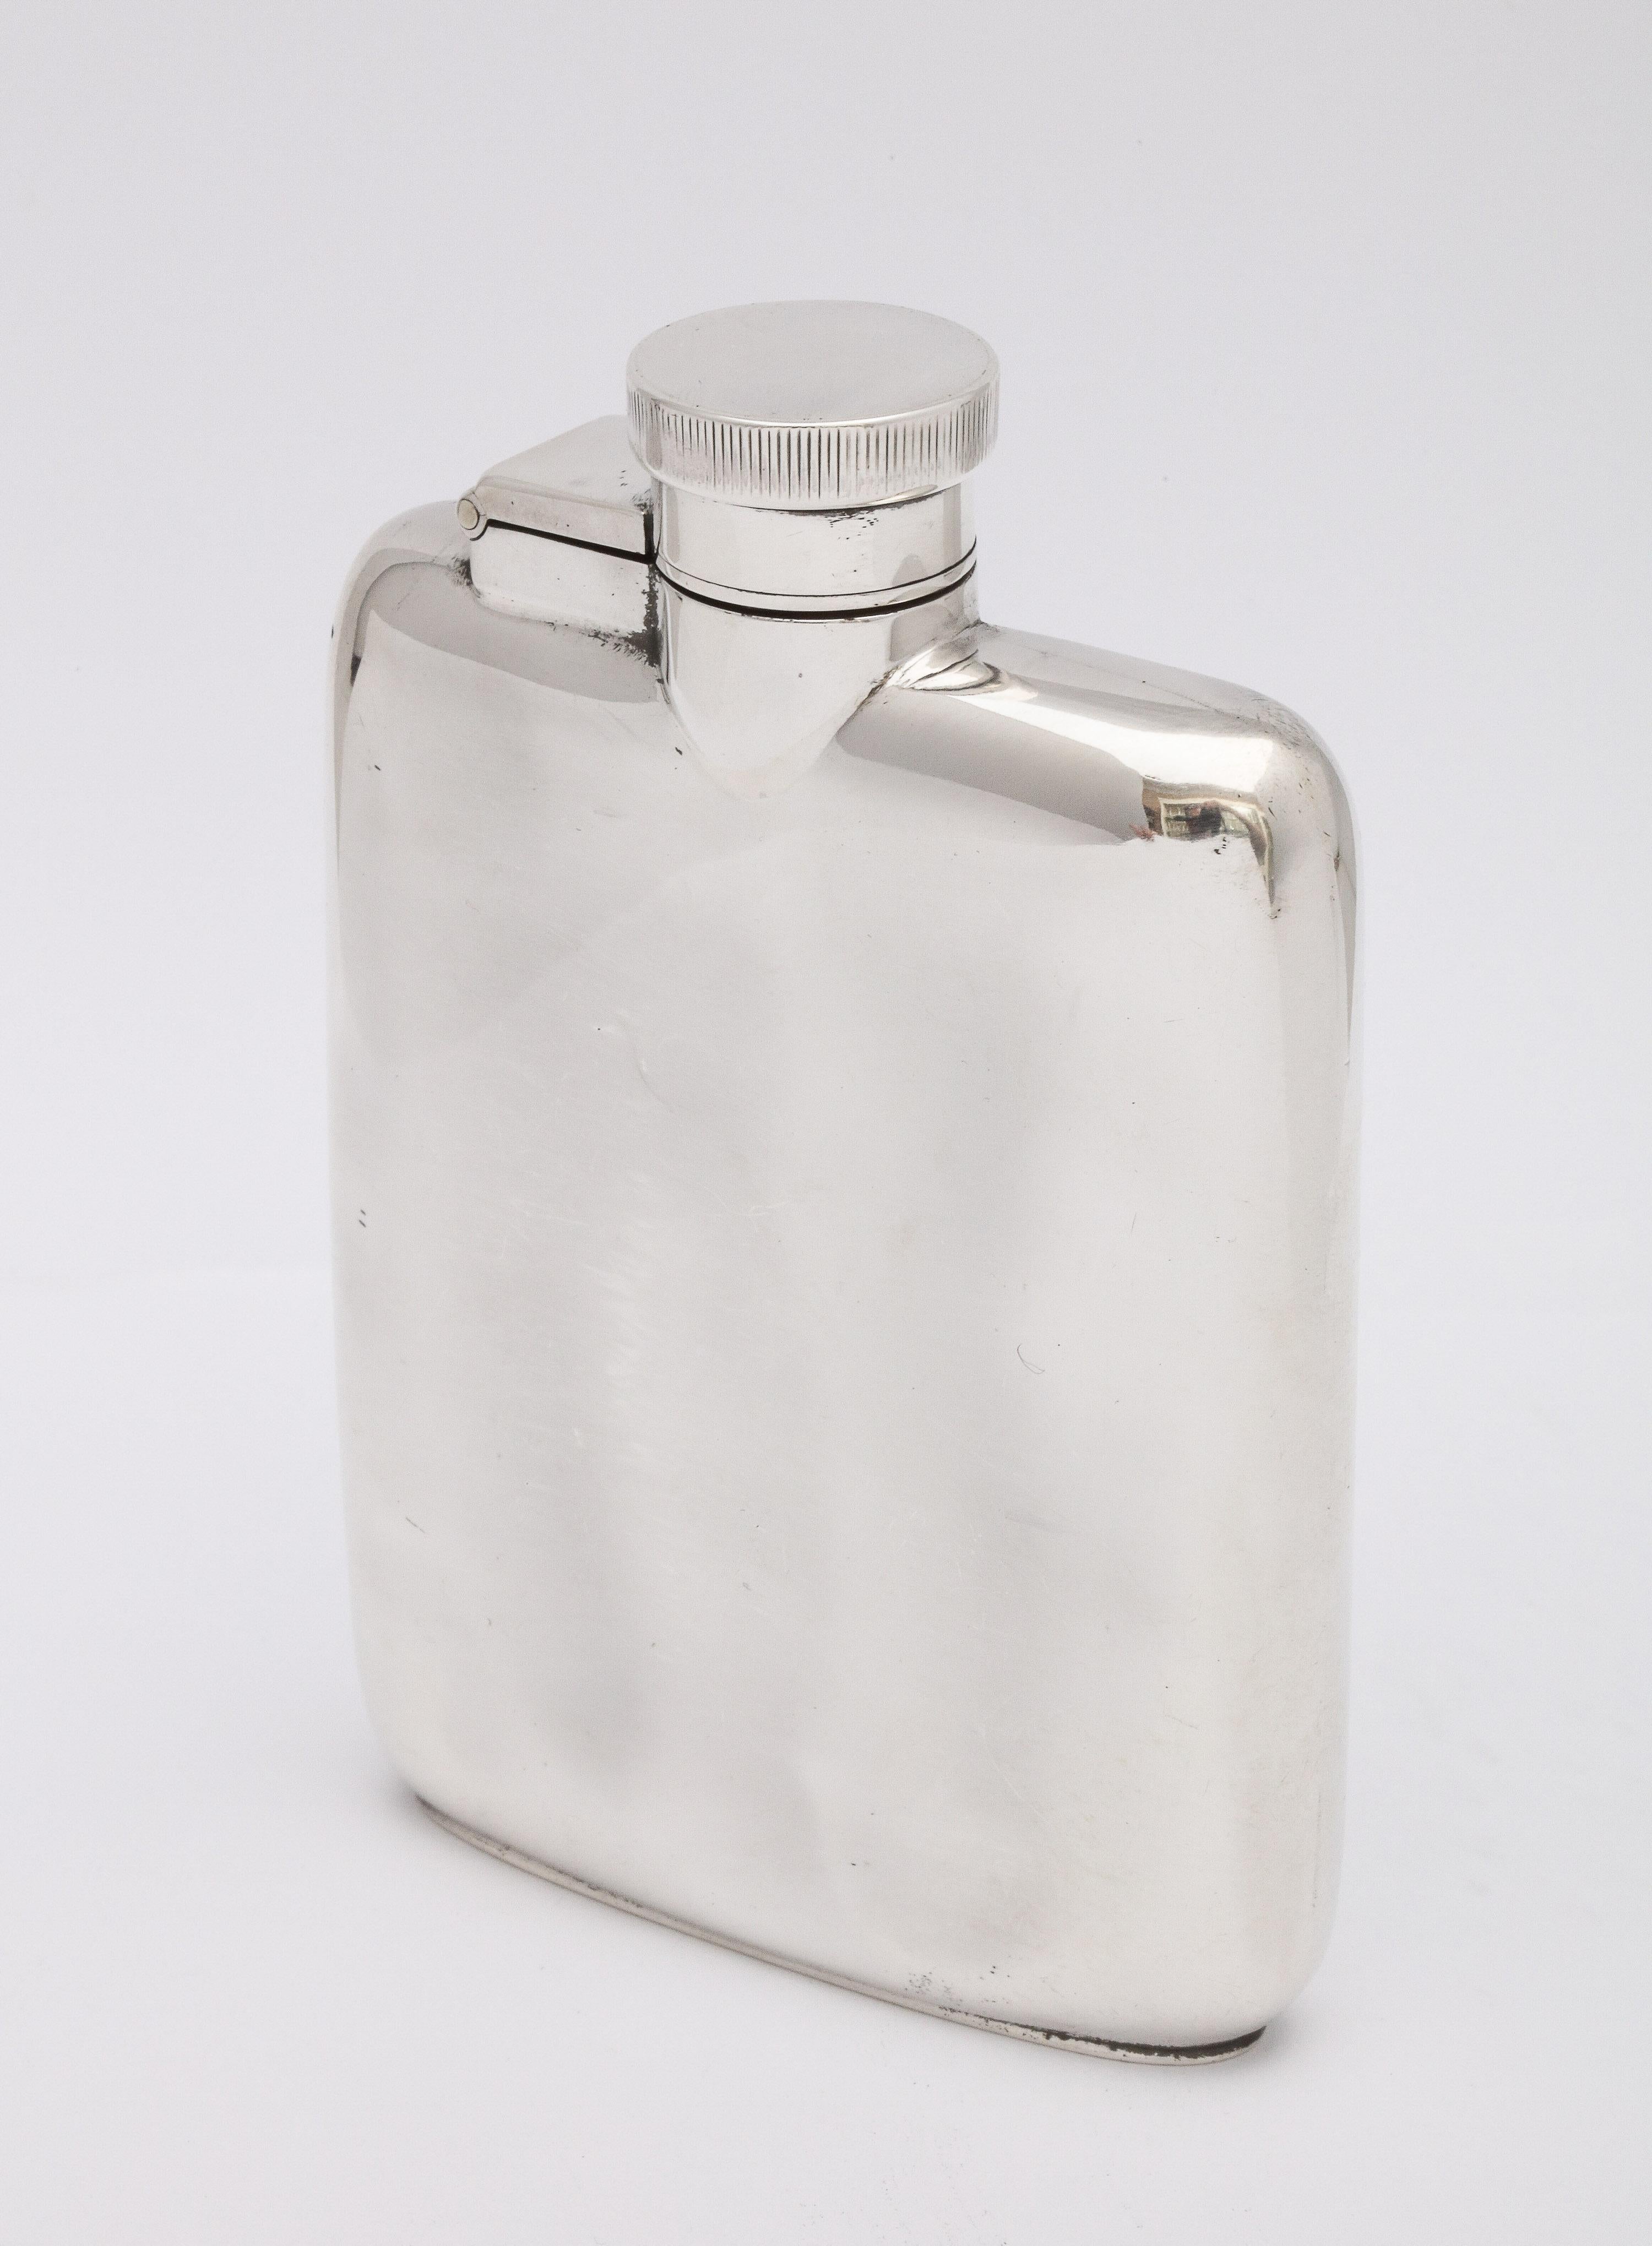 Art Deco, sterling silver flask with hinged lid, Chester, England, Robert William Jay - maker. Measures: 4 1/4 inches high x 2 3/4 inches wide (at widest point) x 3/4 inches deep. Weighs 3.515 troy ounces. Hinged lid has bayonet closure. Dark spots